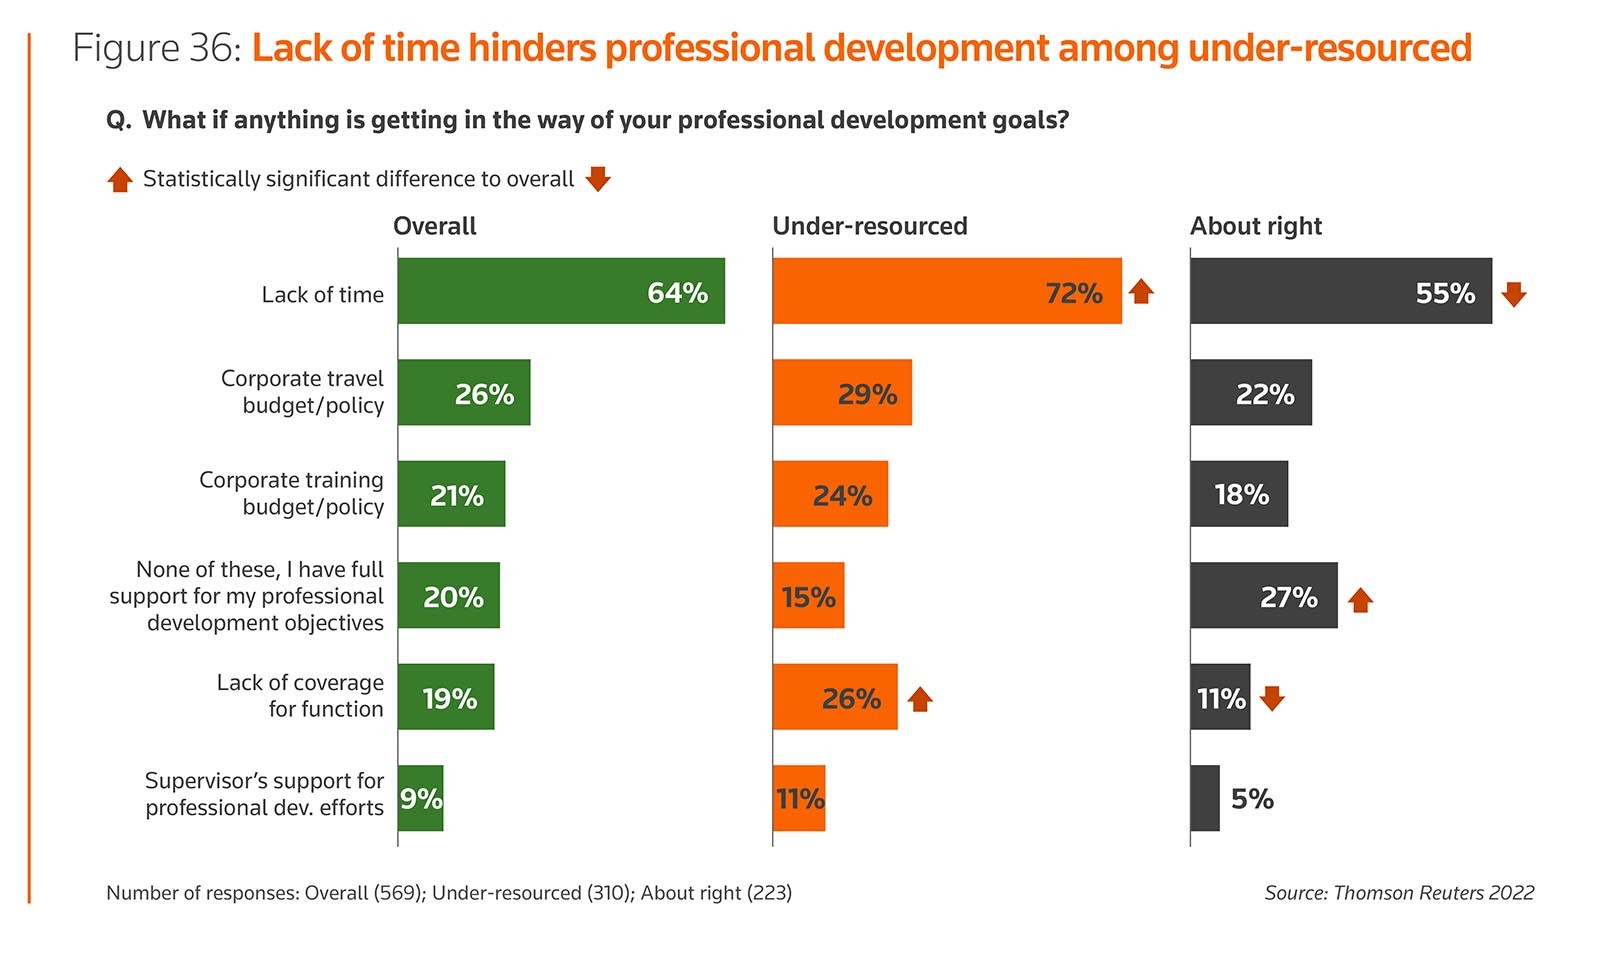 Figure 36: Lack of time hinders professional development among under-resourced